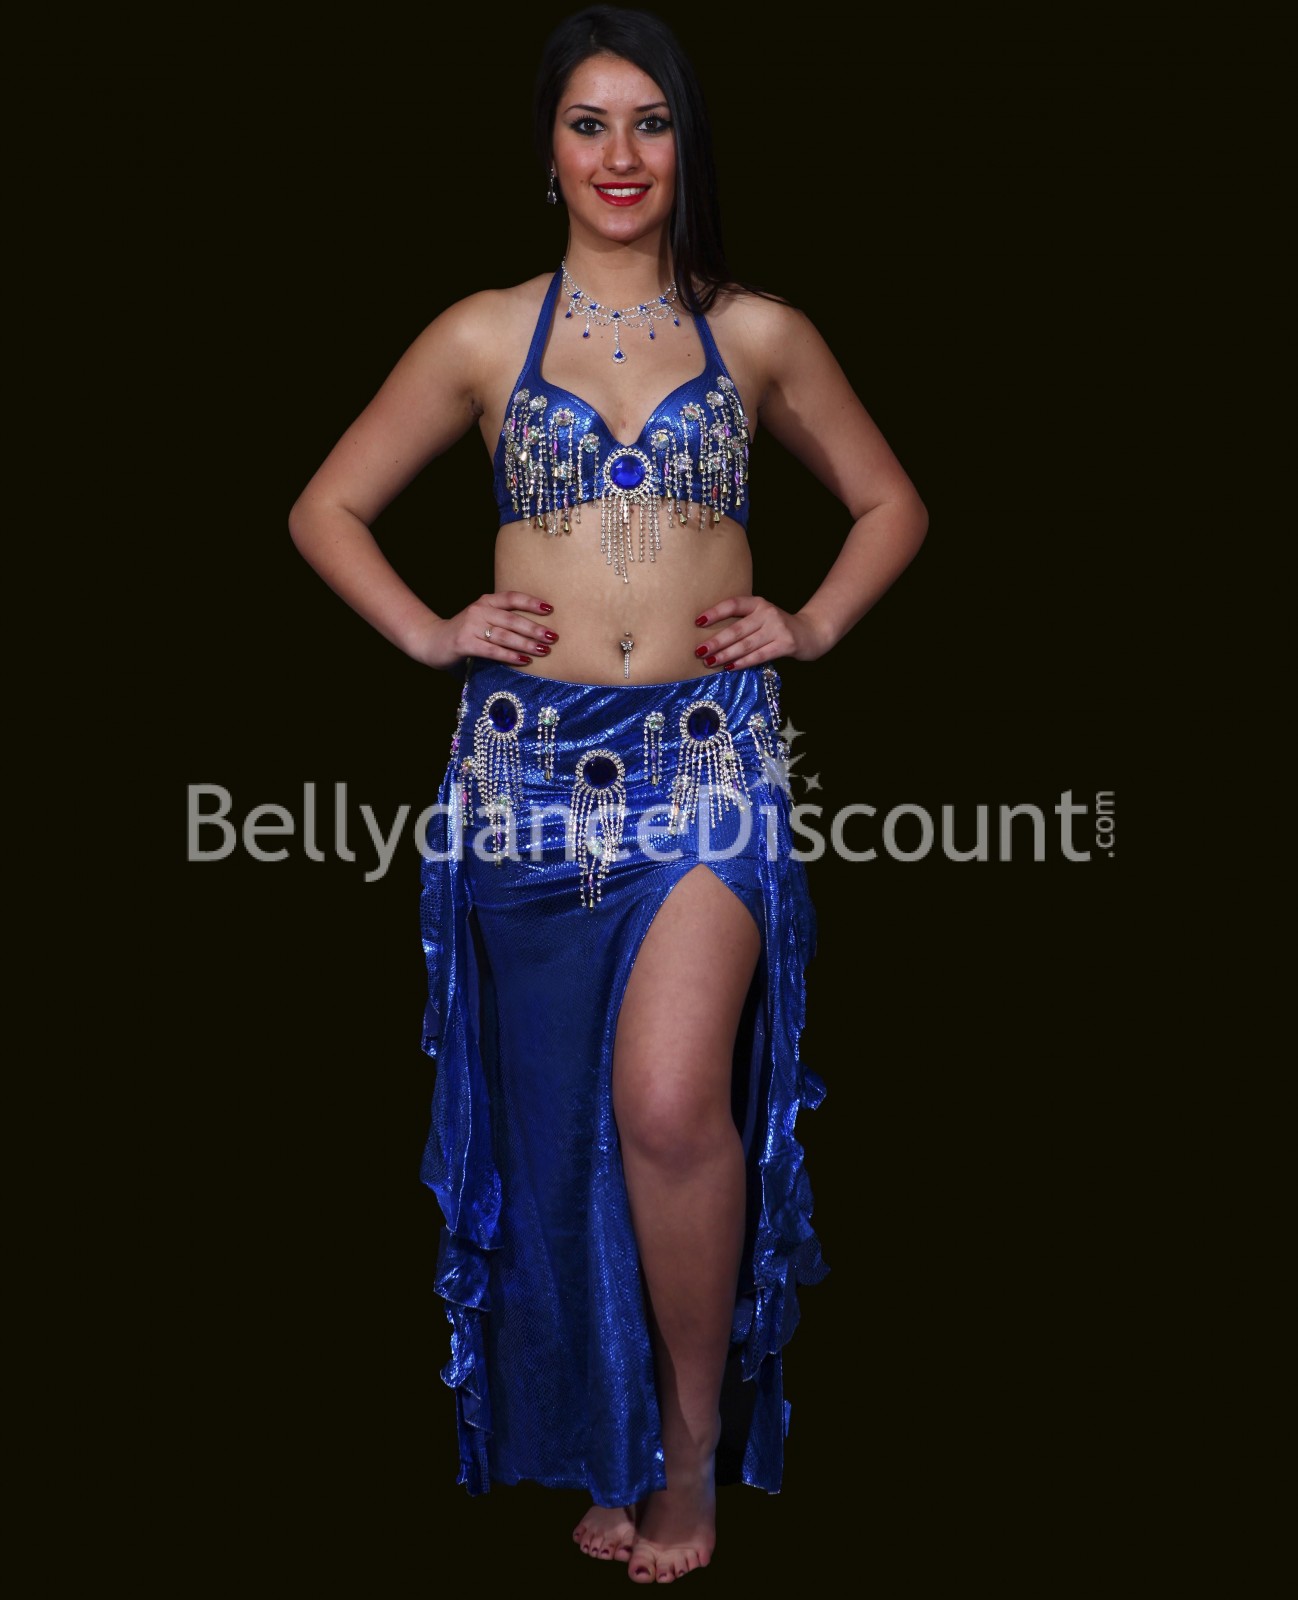 New Indian Professional Special Belly Dancing Costumes 6 PCS 